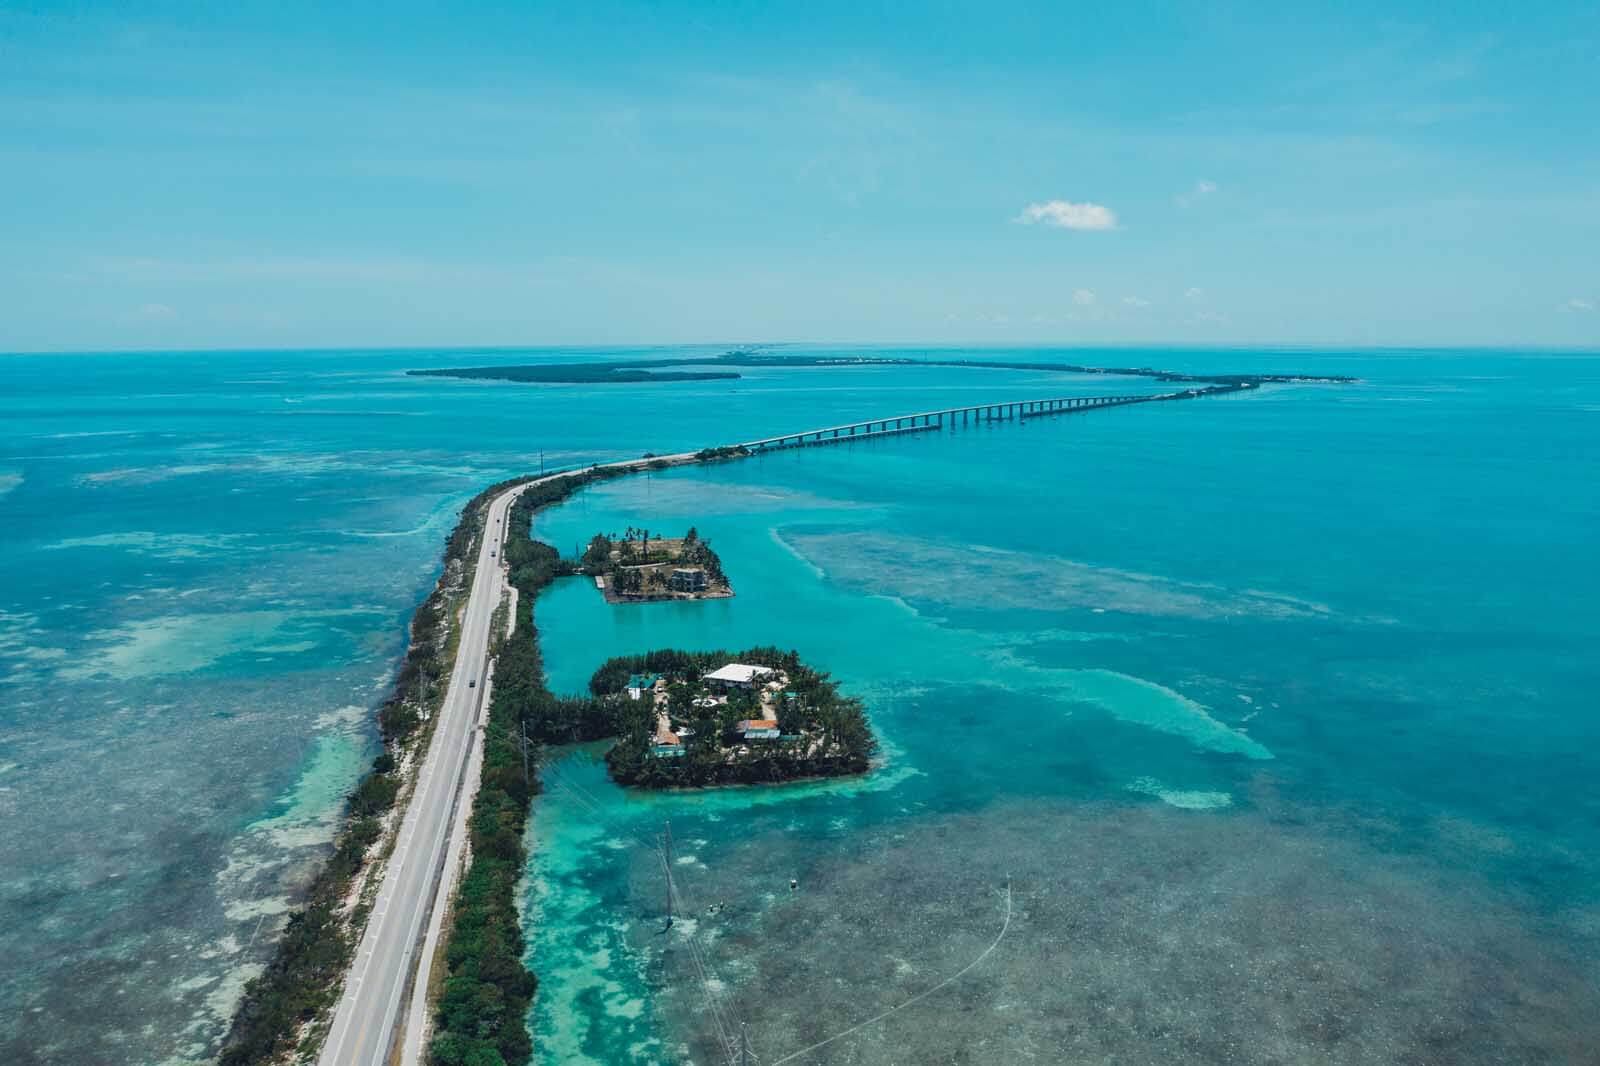 View of the 7 mile bridge in the Florida Keys